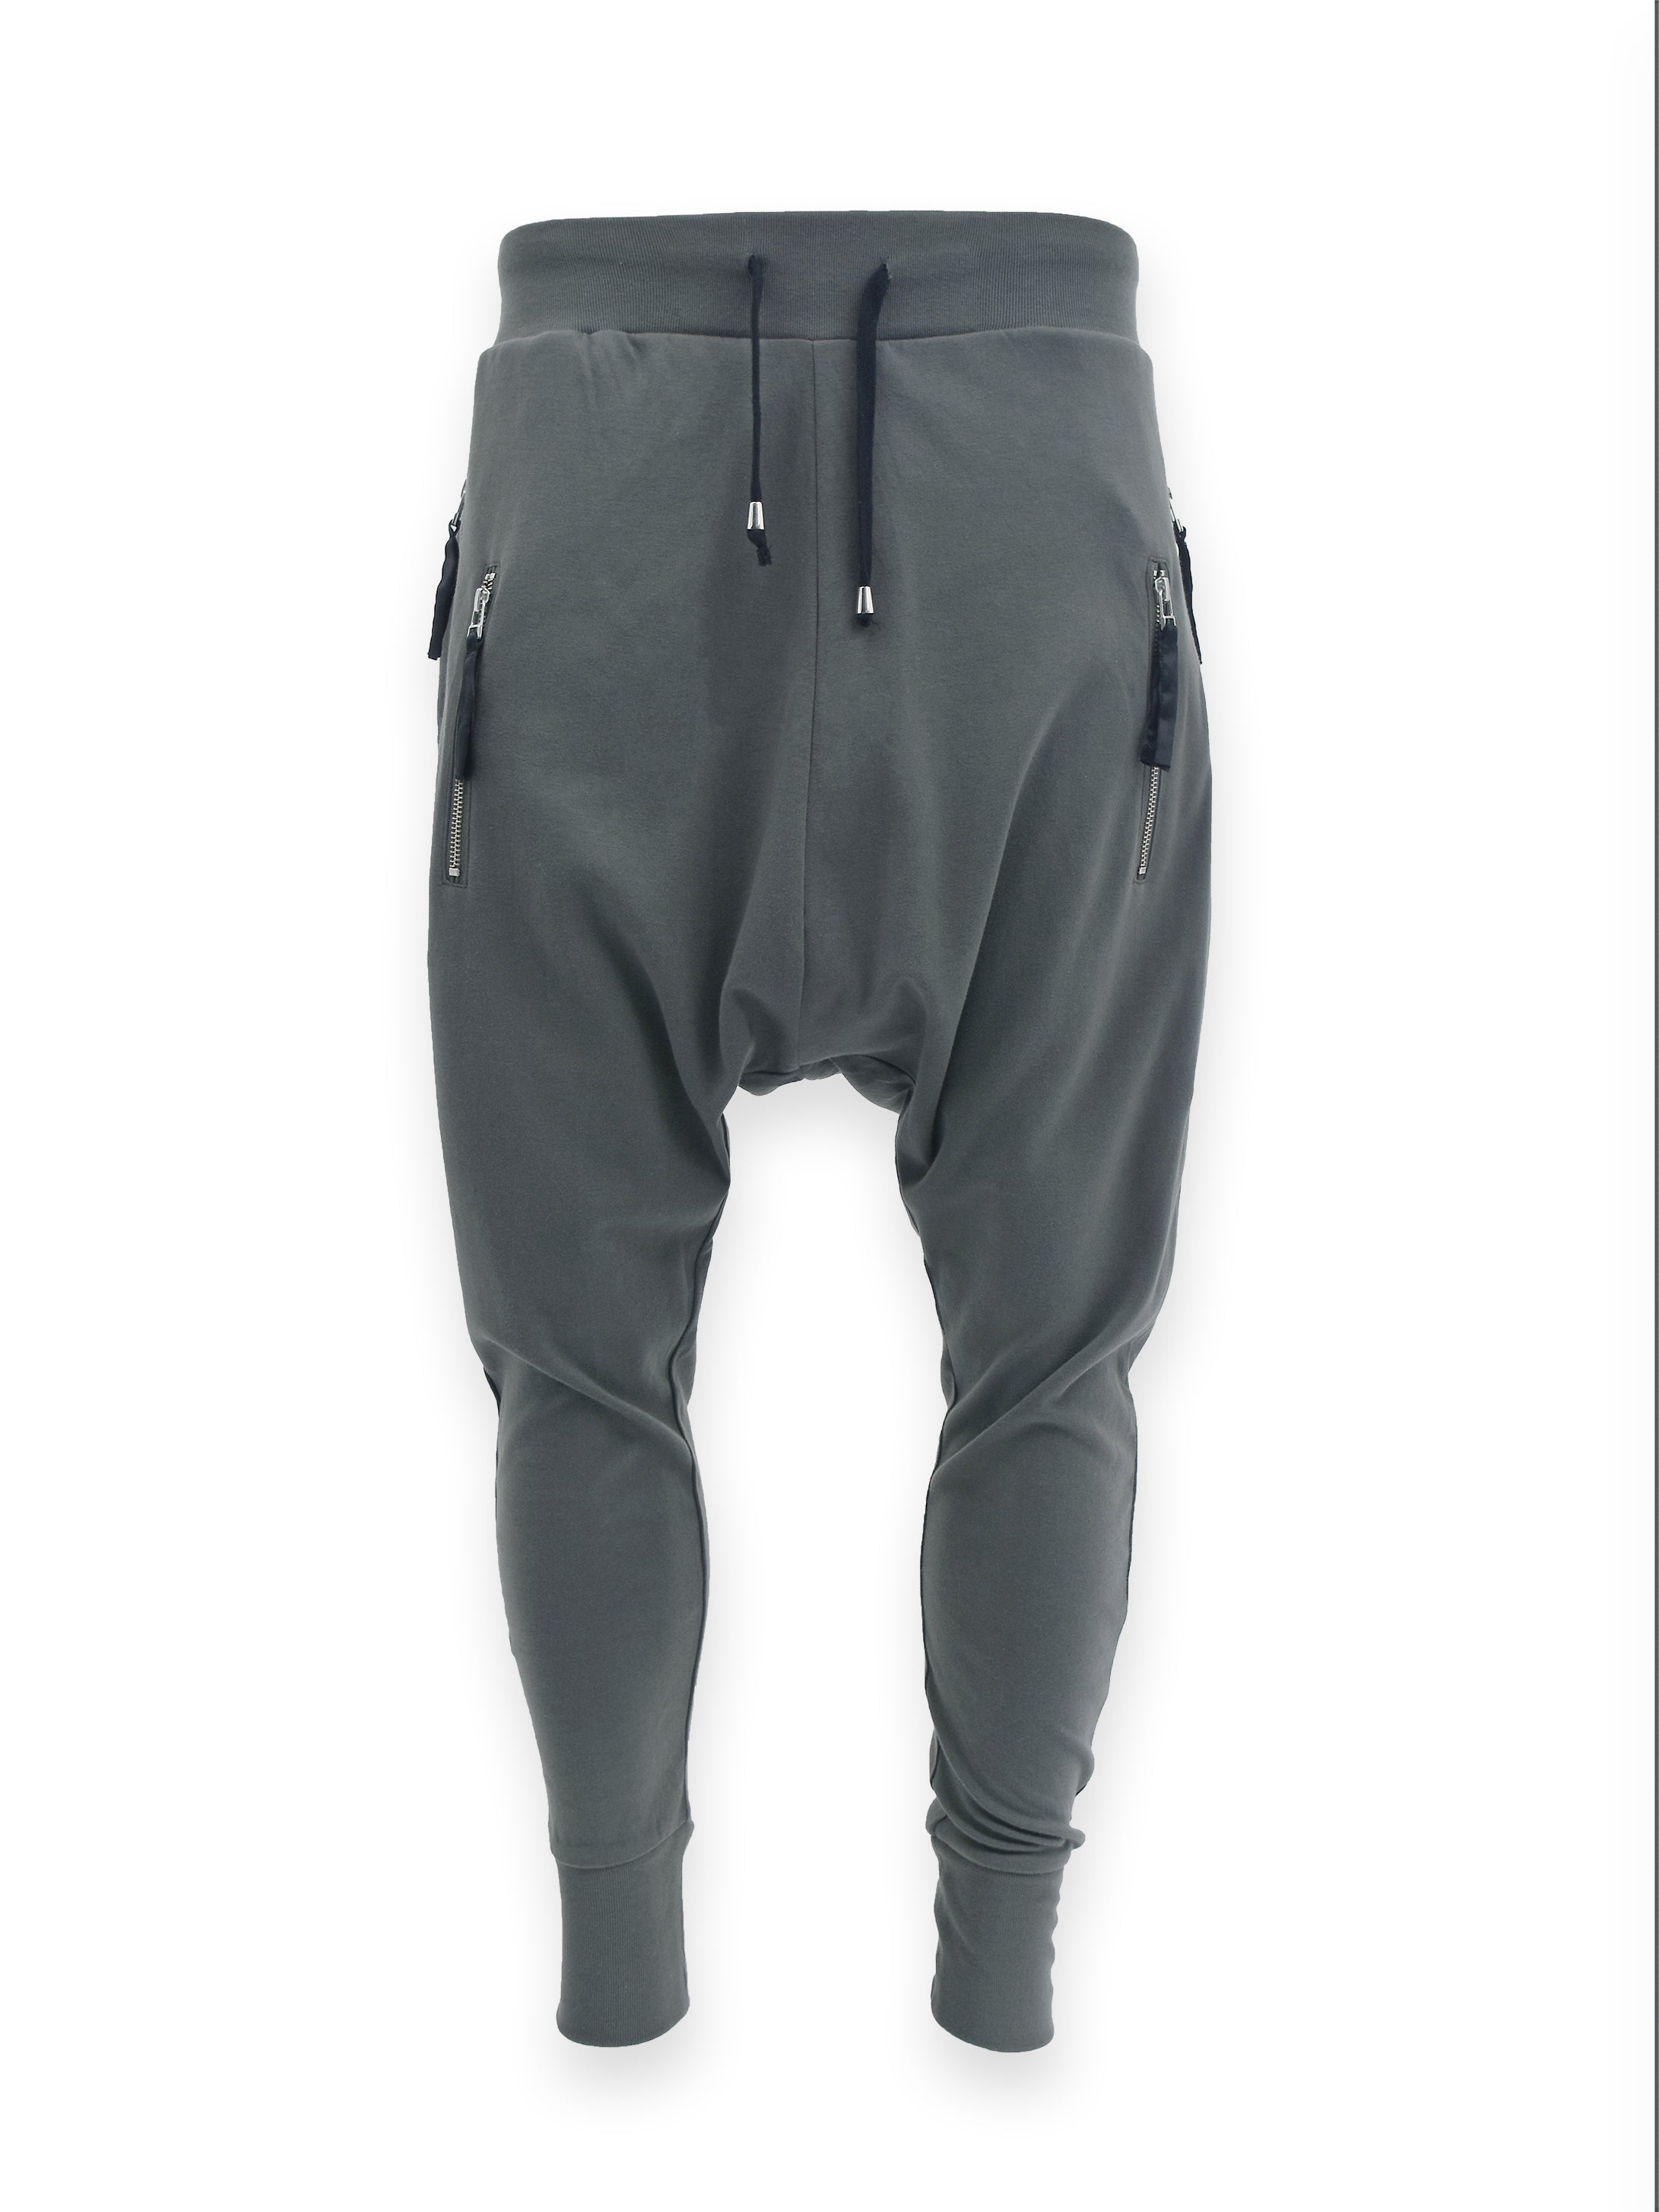 GREY DROP CROTCH JOGGERS WITH DOUBLE ZIP